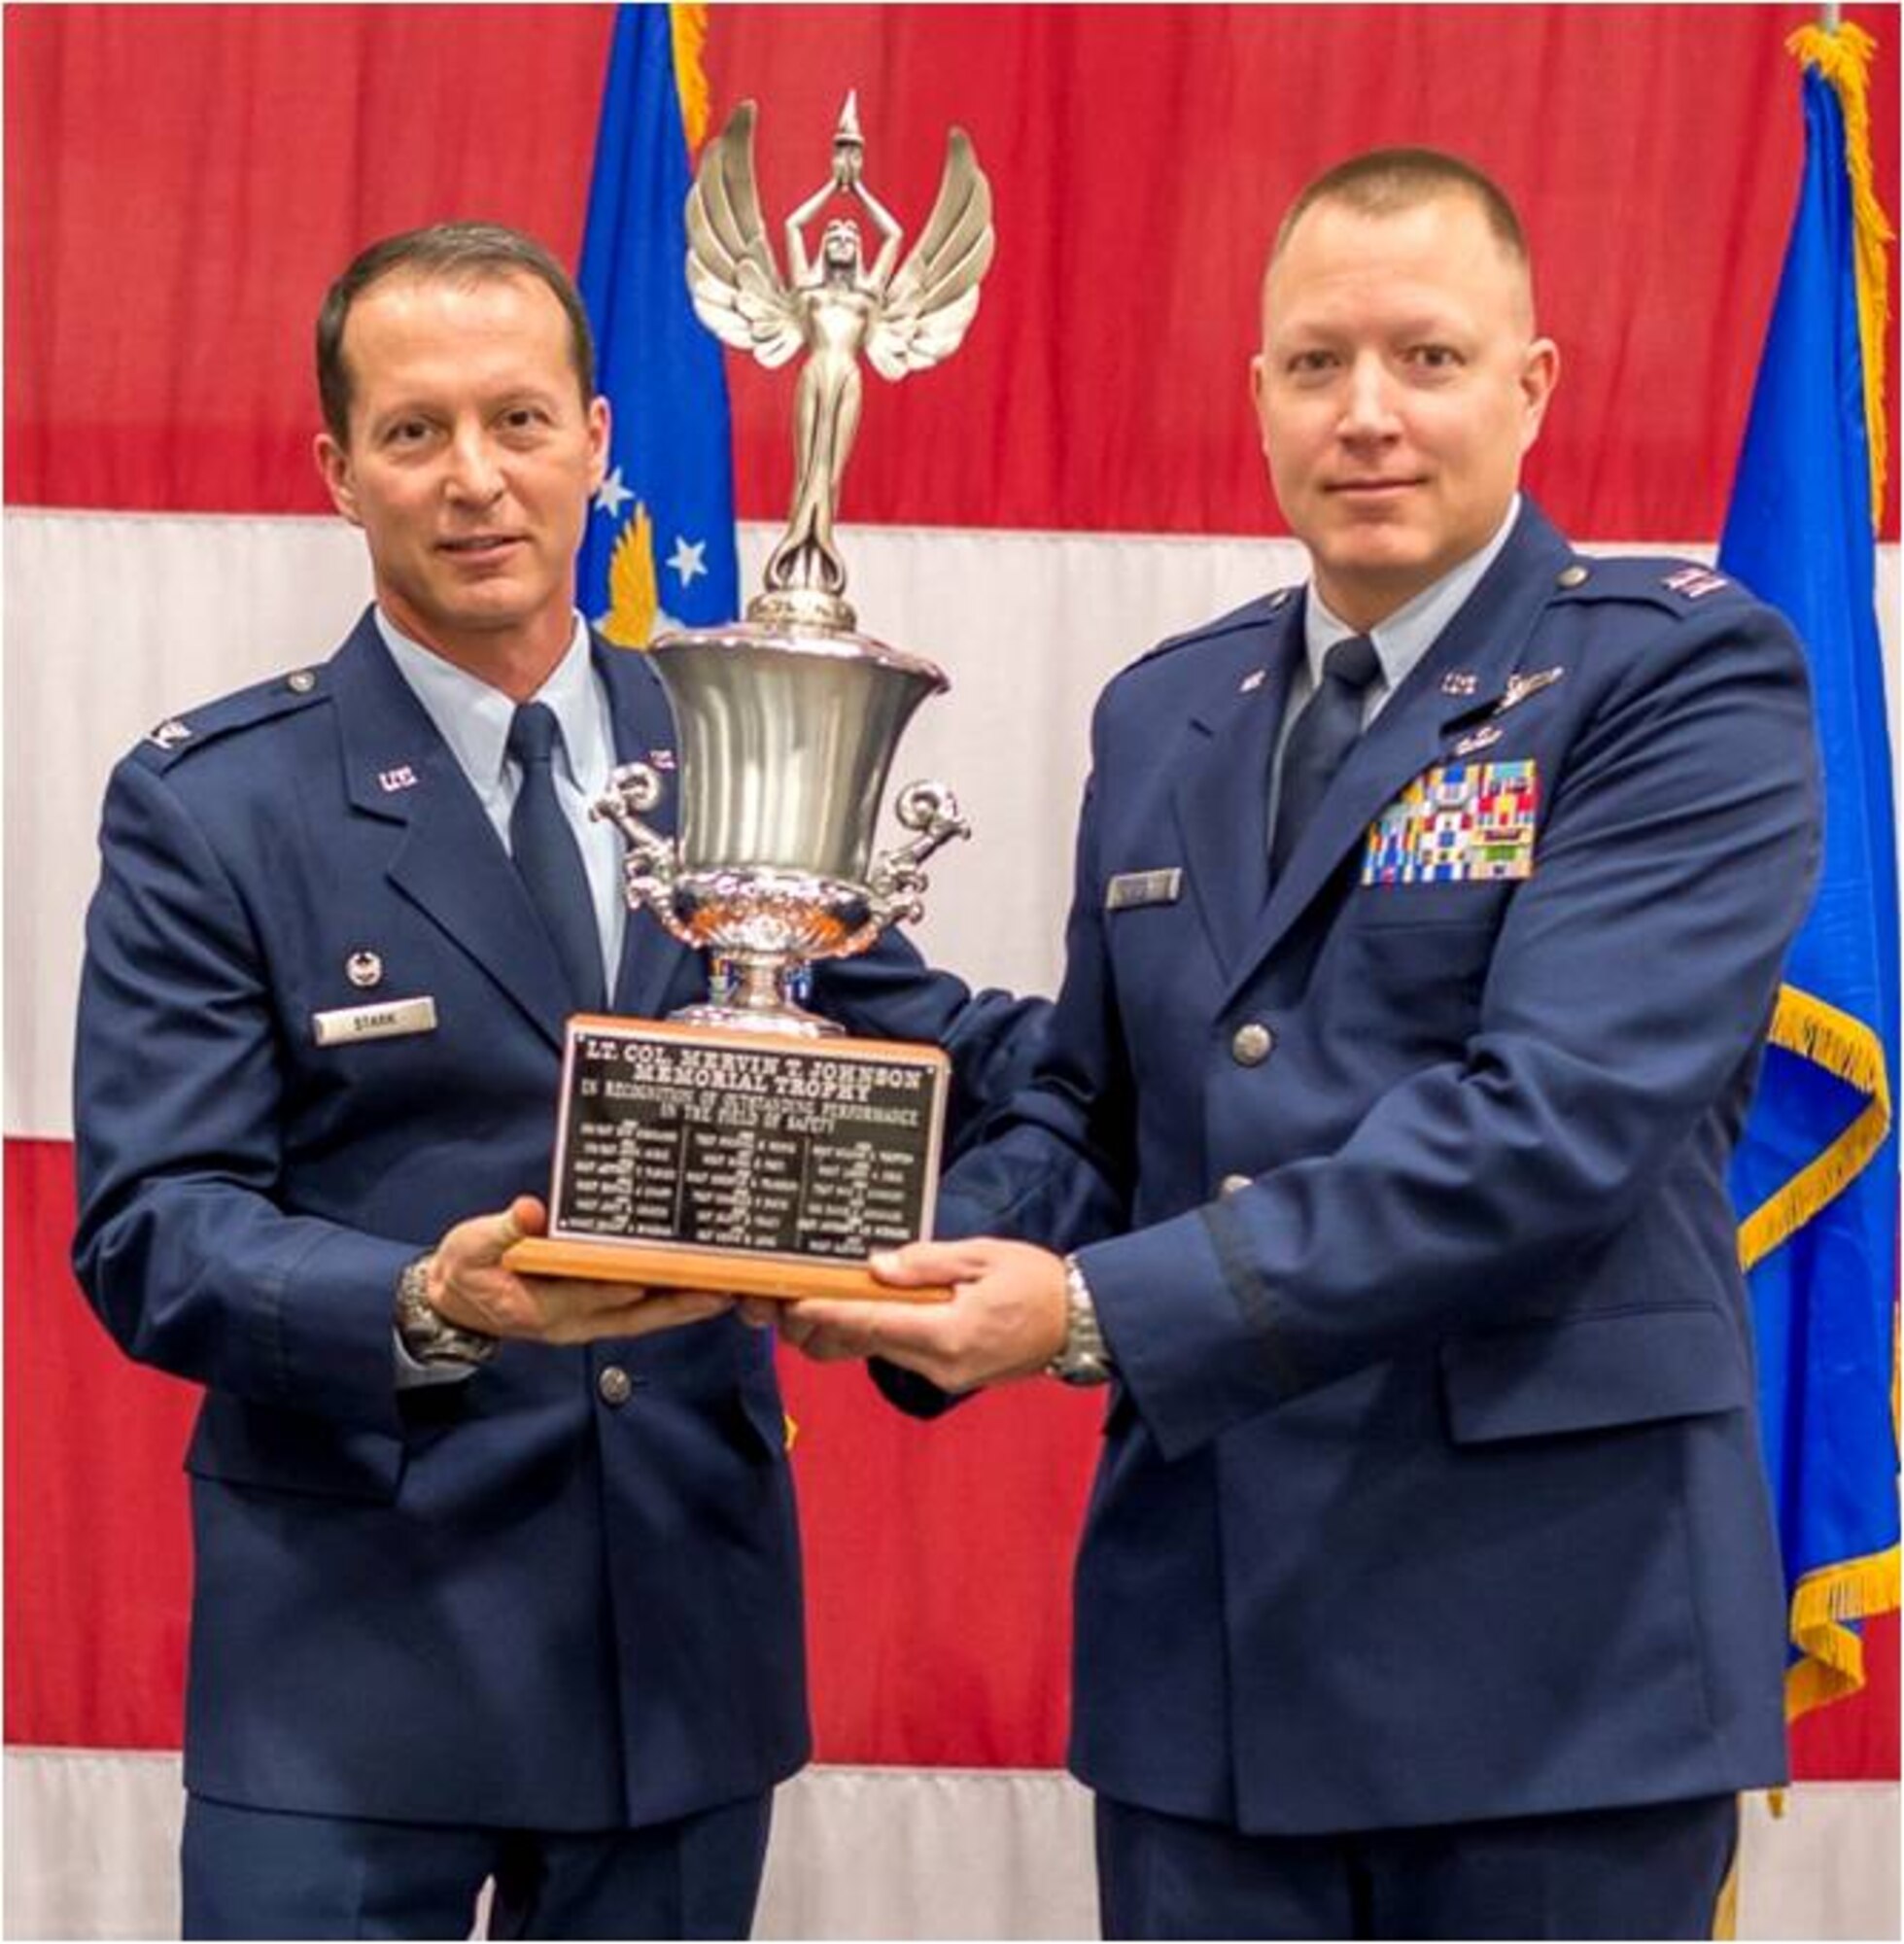 Capt. Thomas Dorsett of the 192nd Airlift Squadron accepts the Safety Award from the 152nd Airlift Wing Commander, Col. Karl Stark, at the Nevada Air National Guard’s Annual Awards Ceremony on December 7, 2014.USAF photo by Maj. Kristoffer Pfalmer RELEASED.